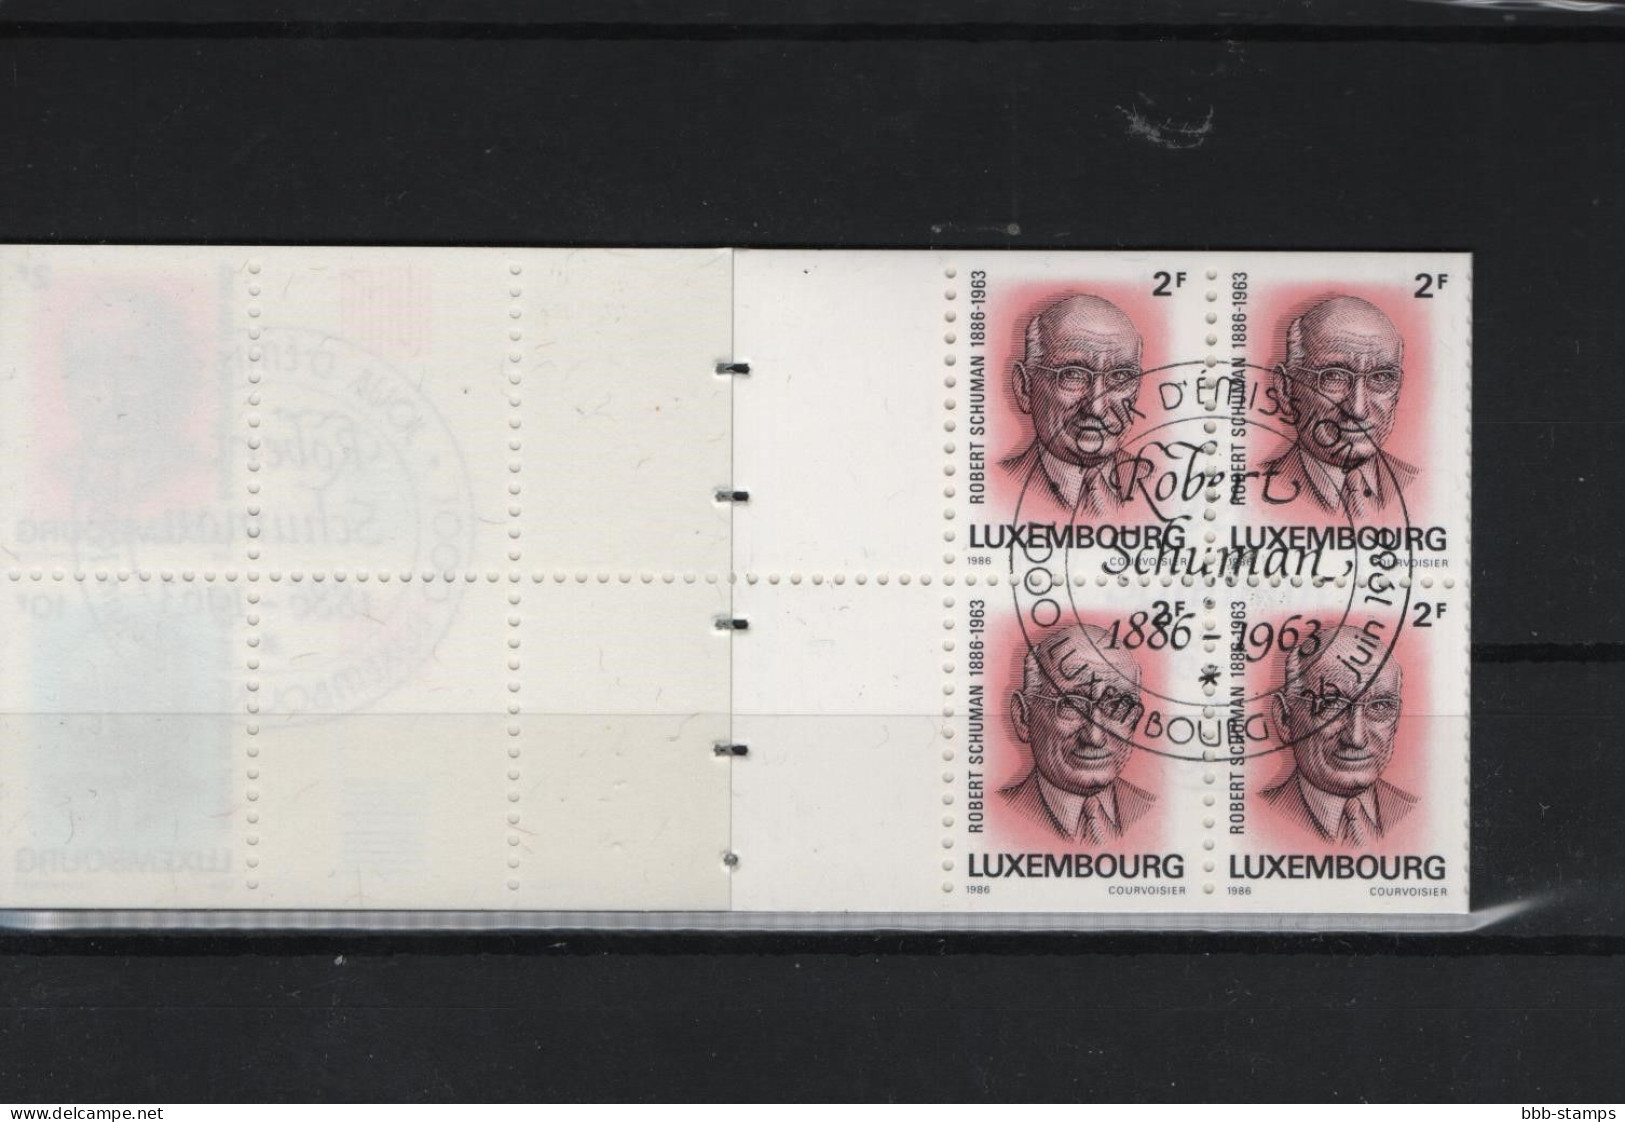 Luxemburg Michel Cat.No.  Booklet Used 1 - Carnets